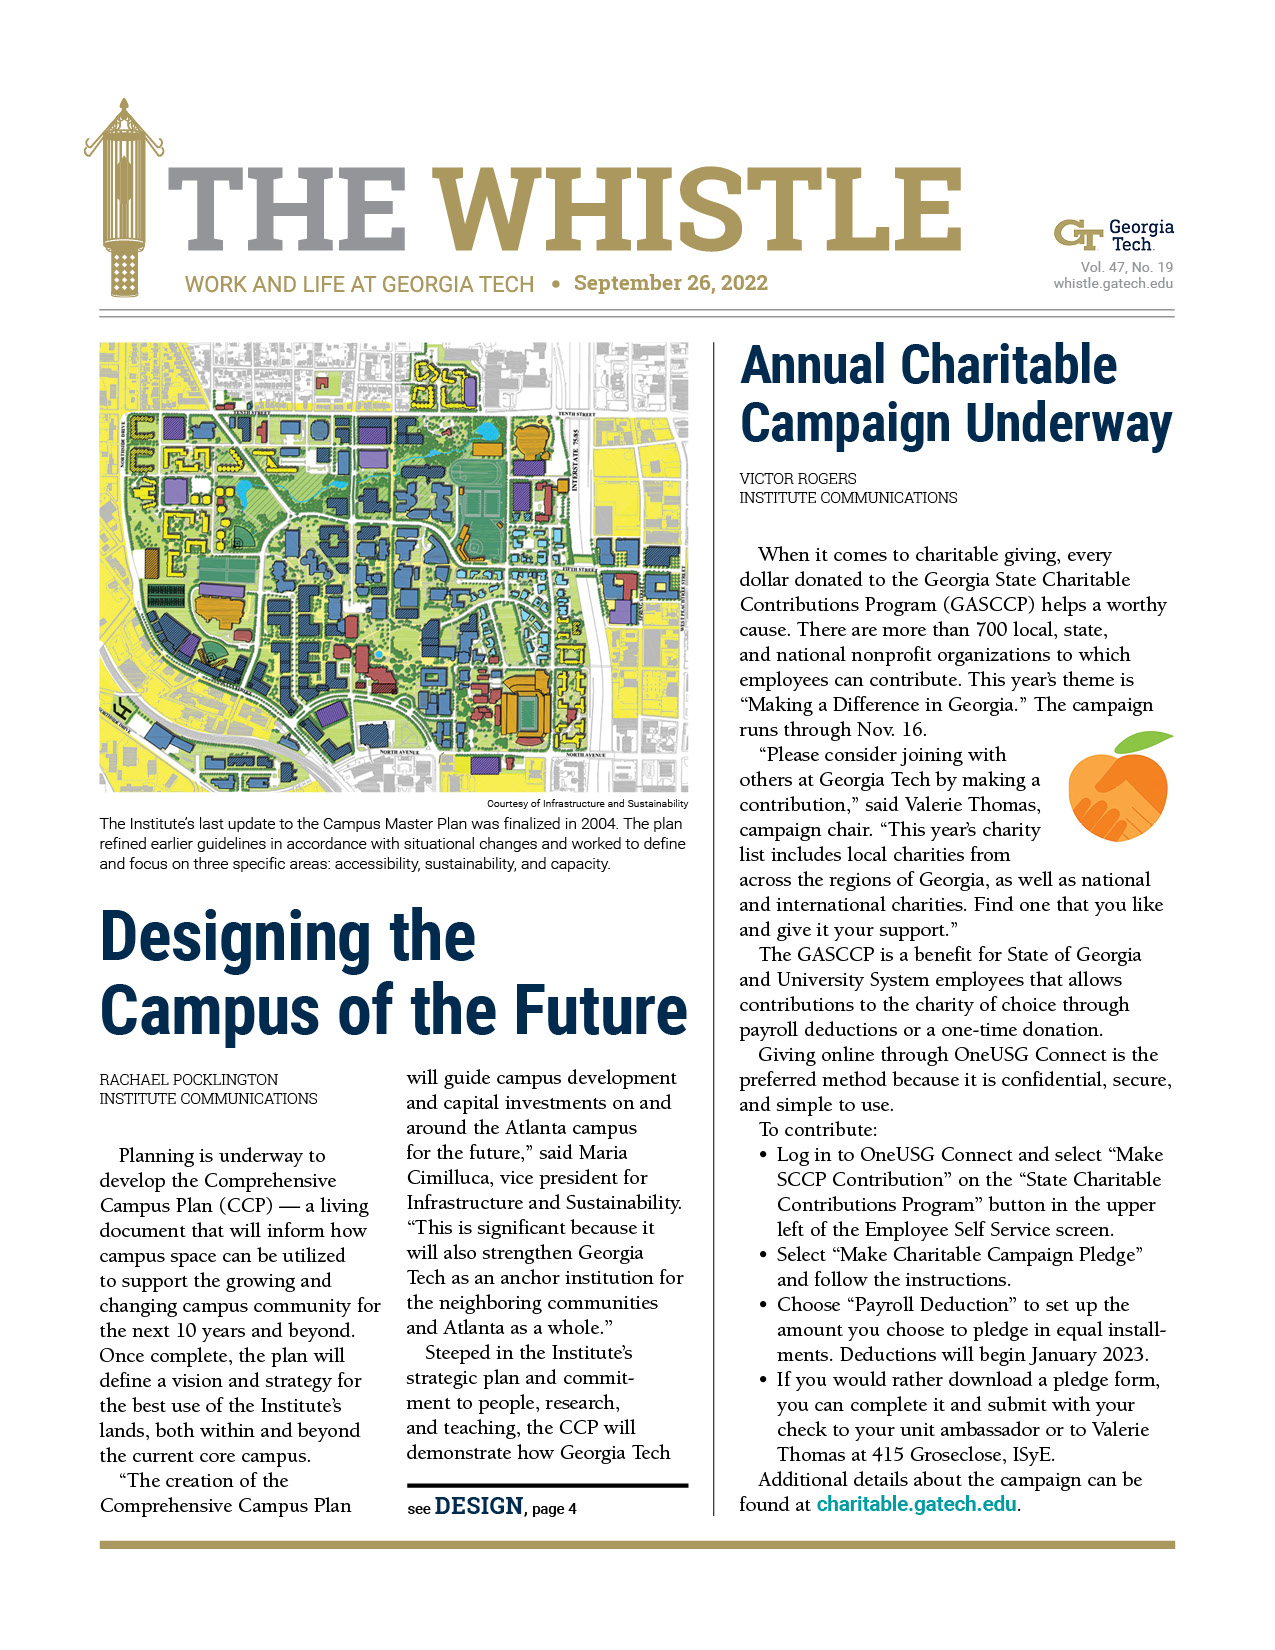 The Whistle - Sept. 26, 2022